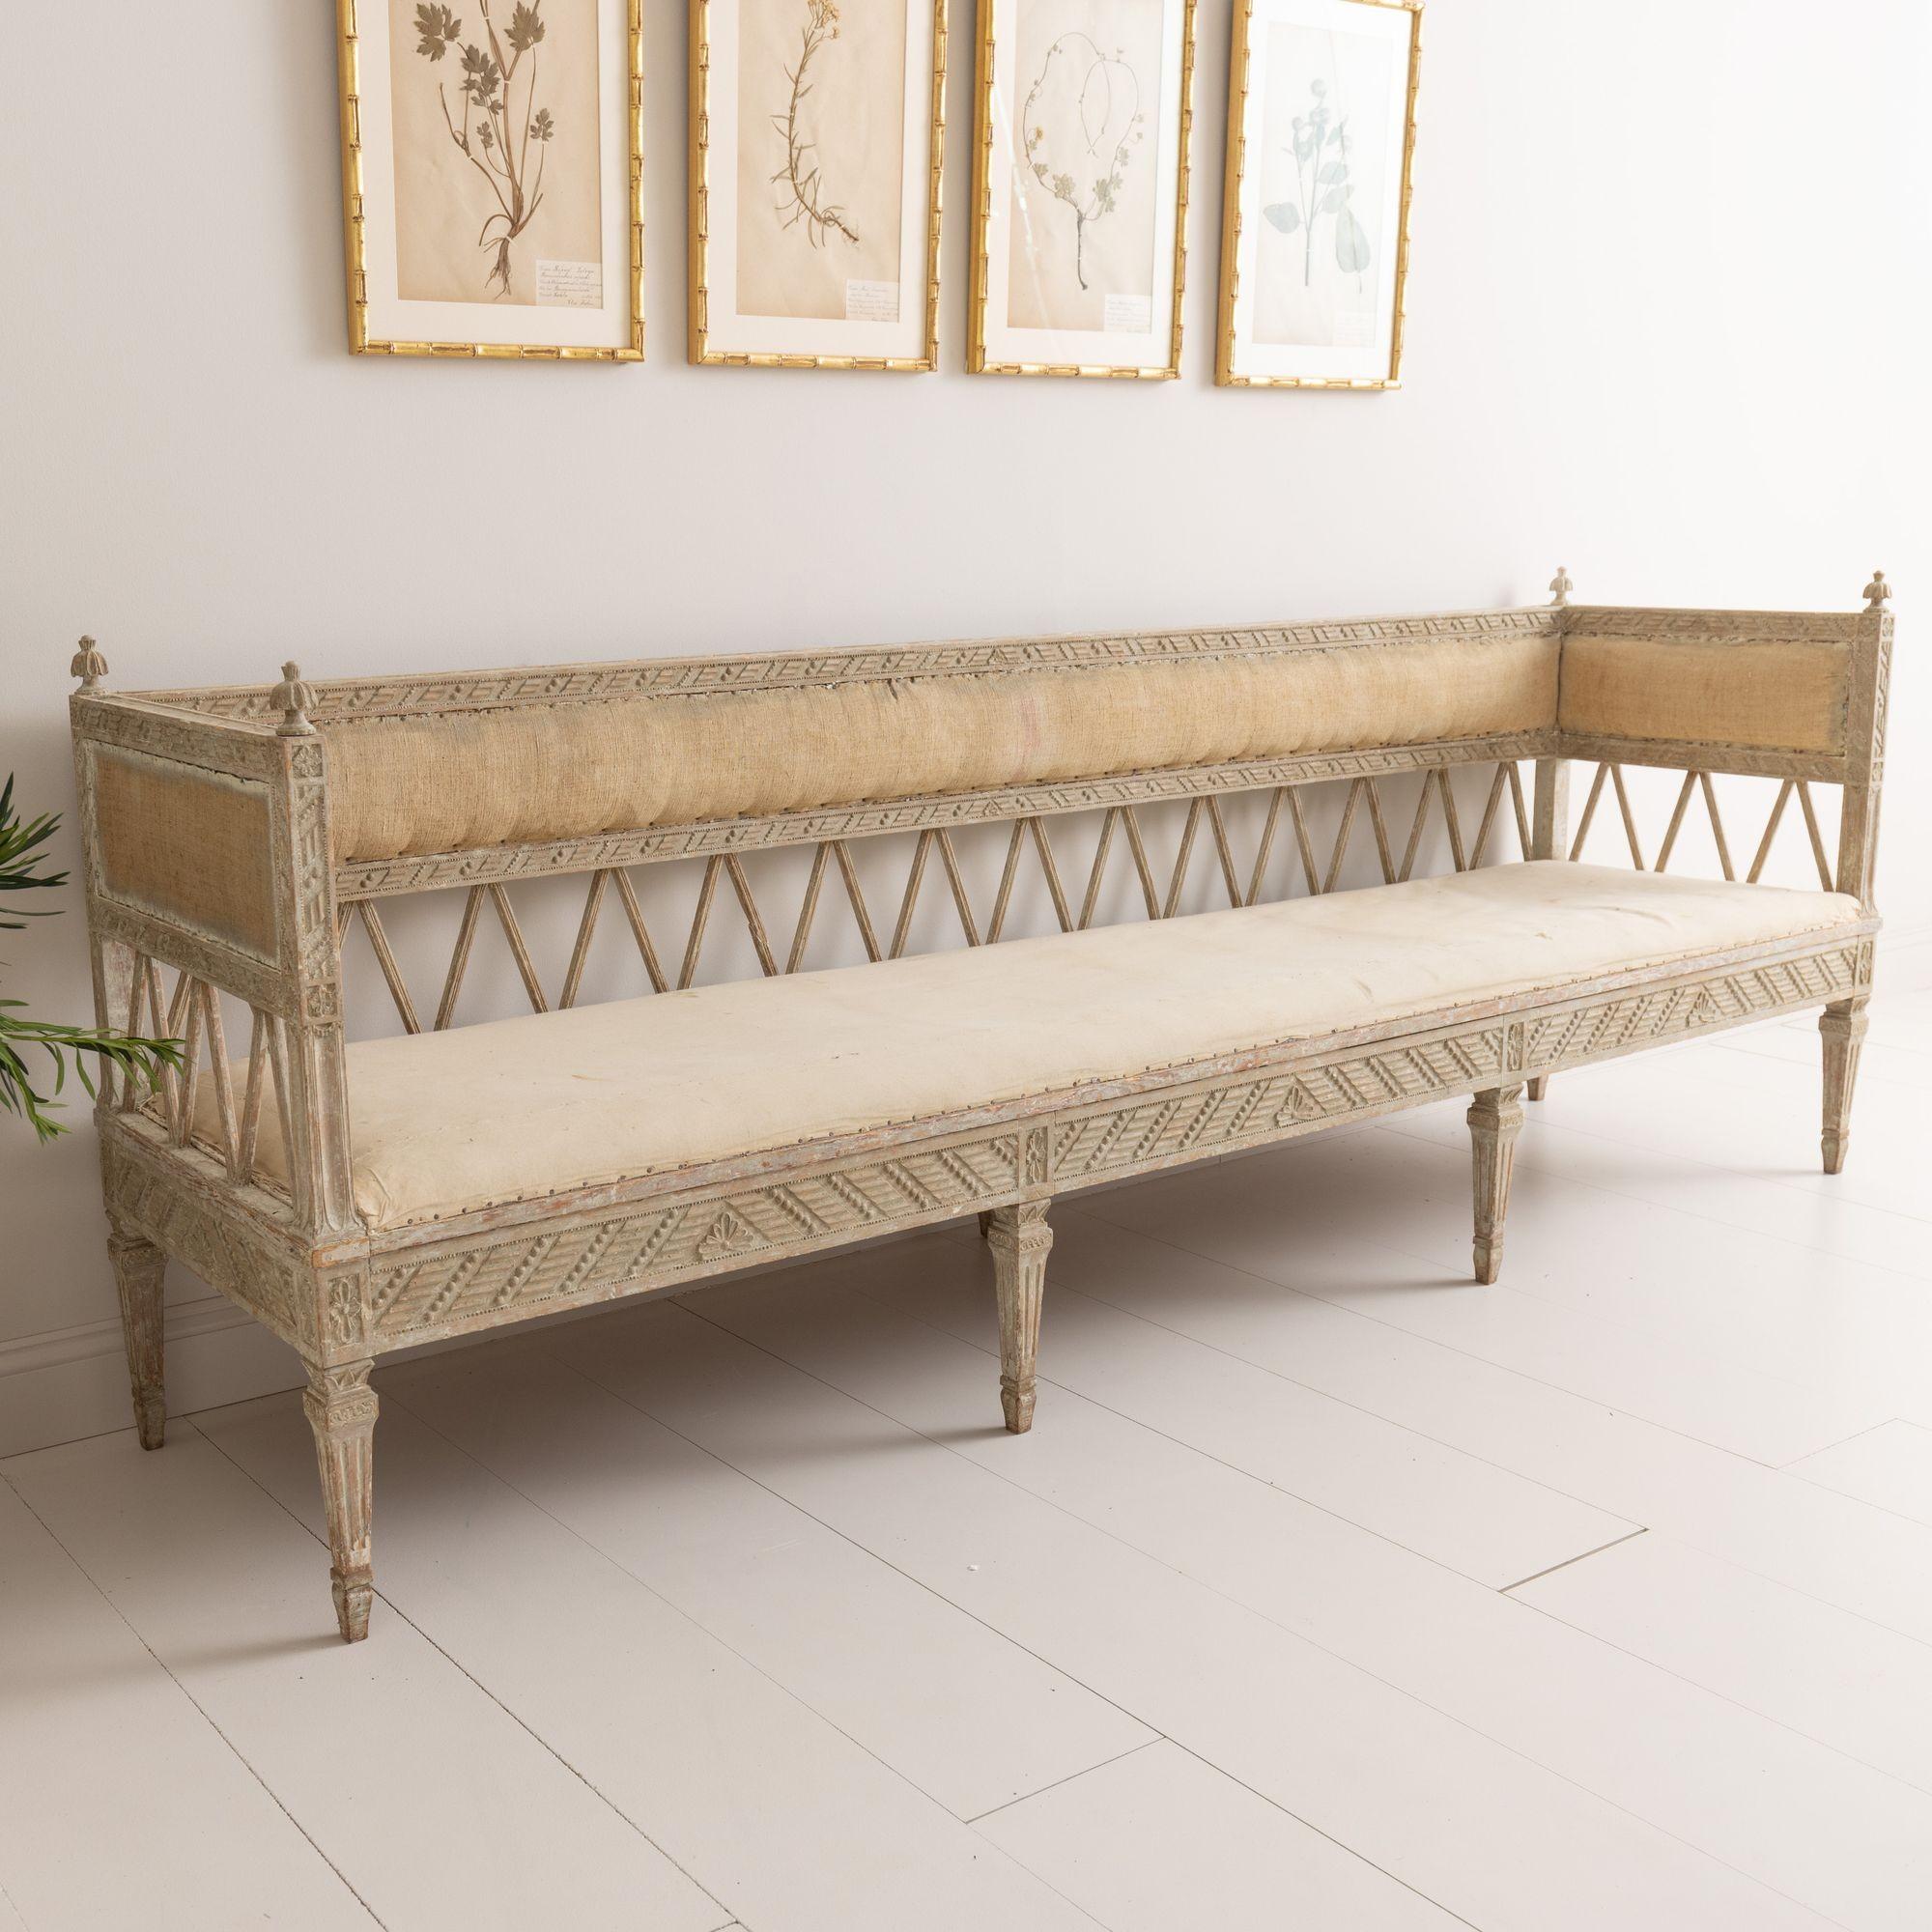 Fabric 18th C. Swedish Early Gustavian Period Long Painted Sofa Bench in Original Paint